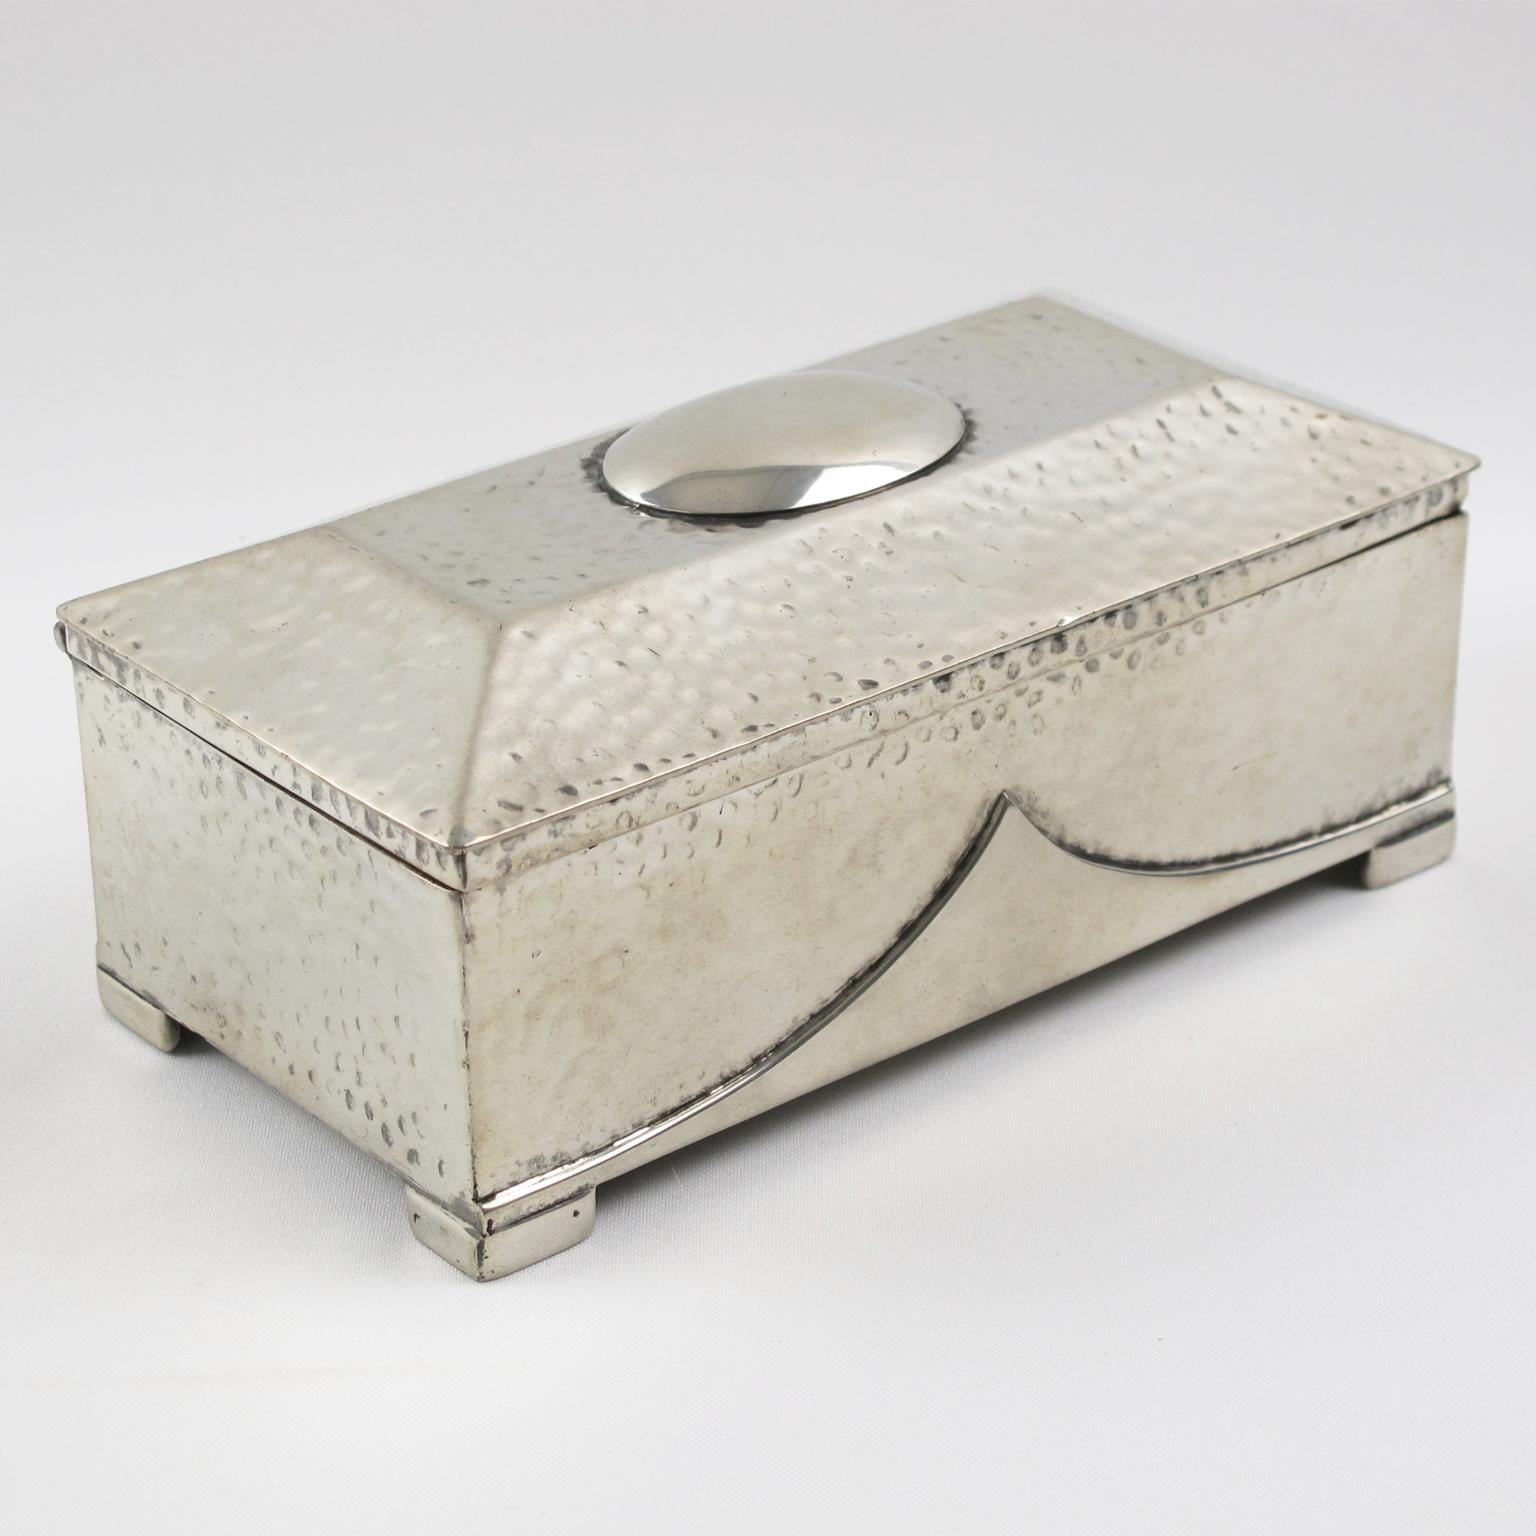 Elegant English Art Deco geometric handwrought dinanderie pewter covered decorative box with beautiful polished patina and lightly hammered pattern. Interior in natural wood. Stamped underside 'Civic Pewter - Made in England'.
Measurements: 6.69